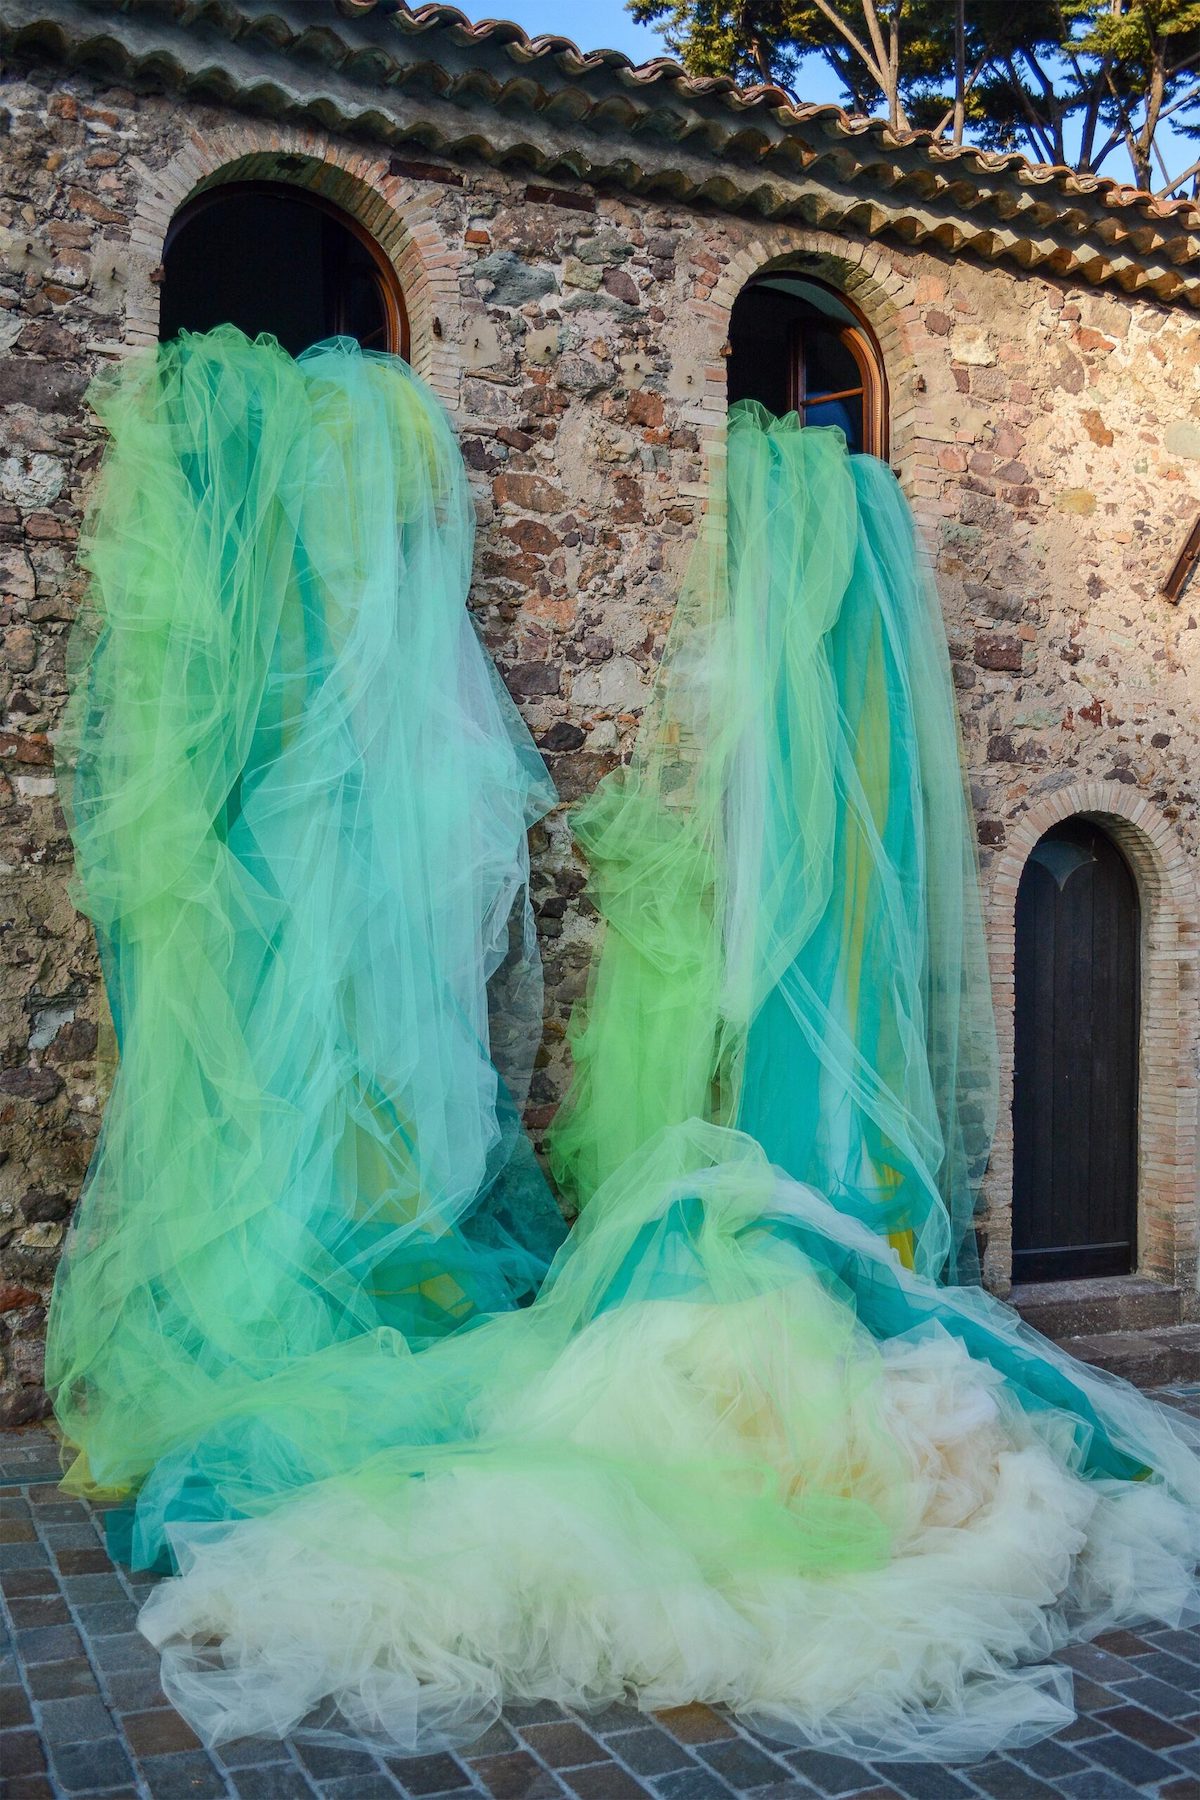 Tulle Fabric Installations by Ana Maria Hernando